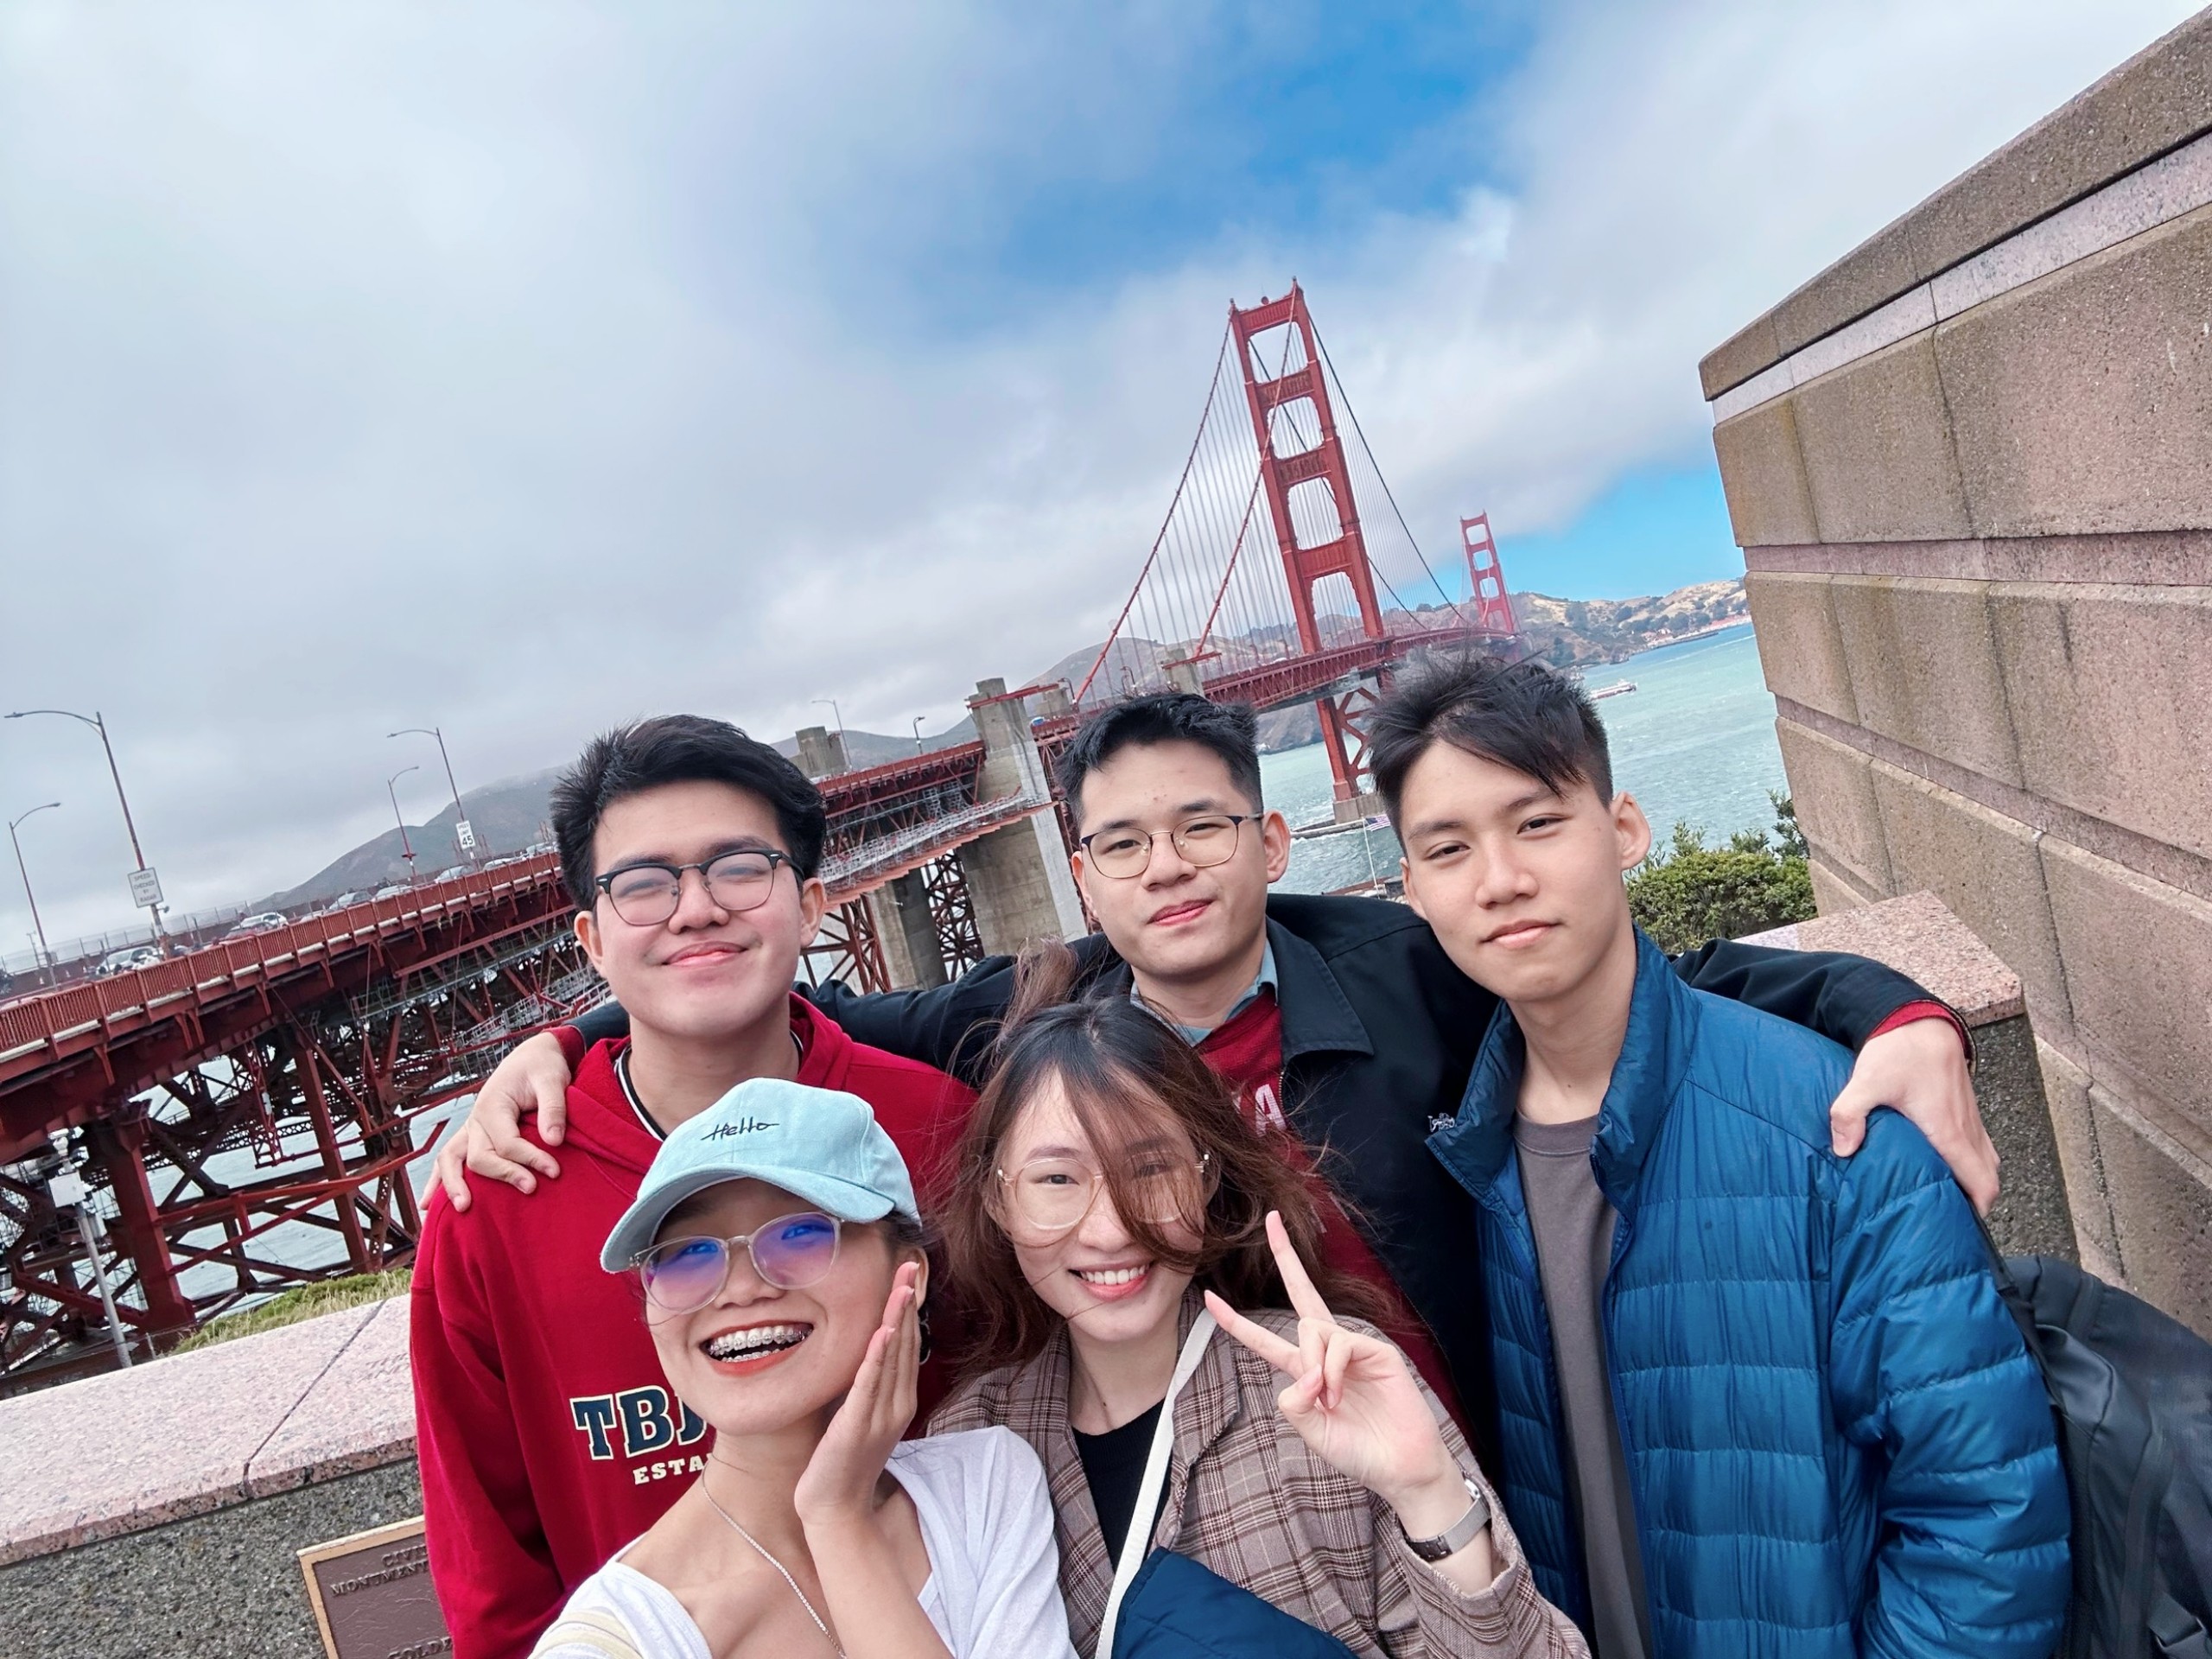 Kien and 5 other SVIC teammates on an outing trip during their program, posing in front of the Golden Gate Bridge